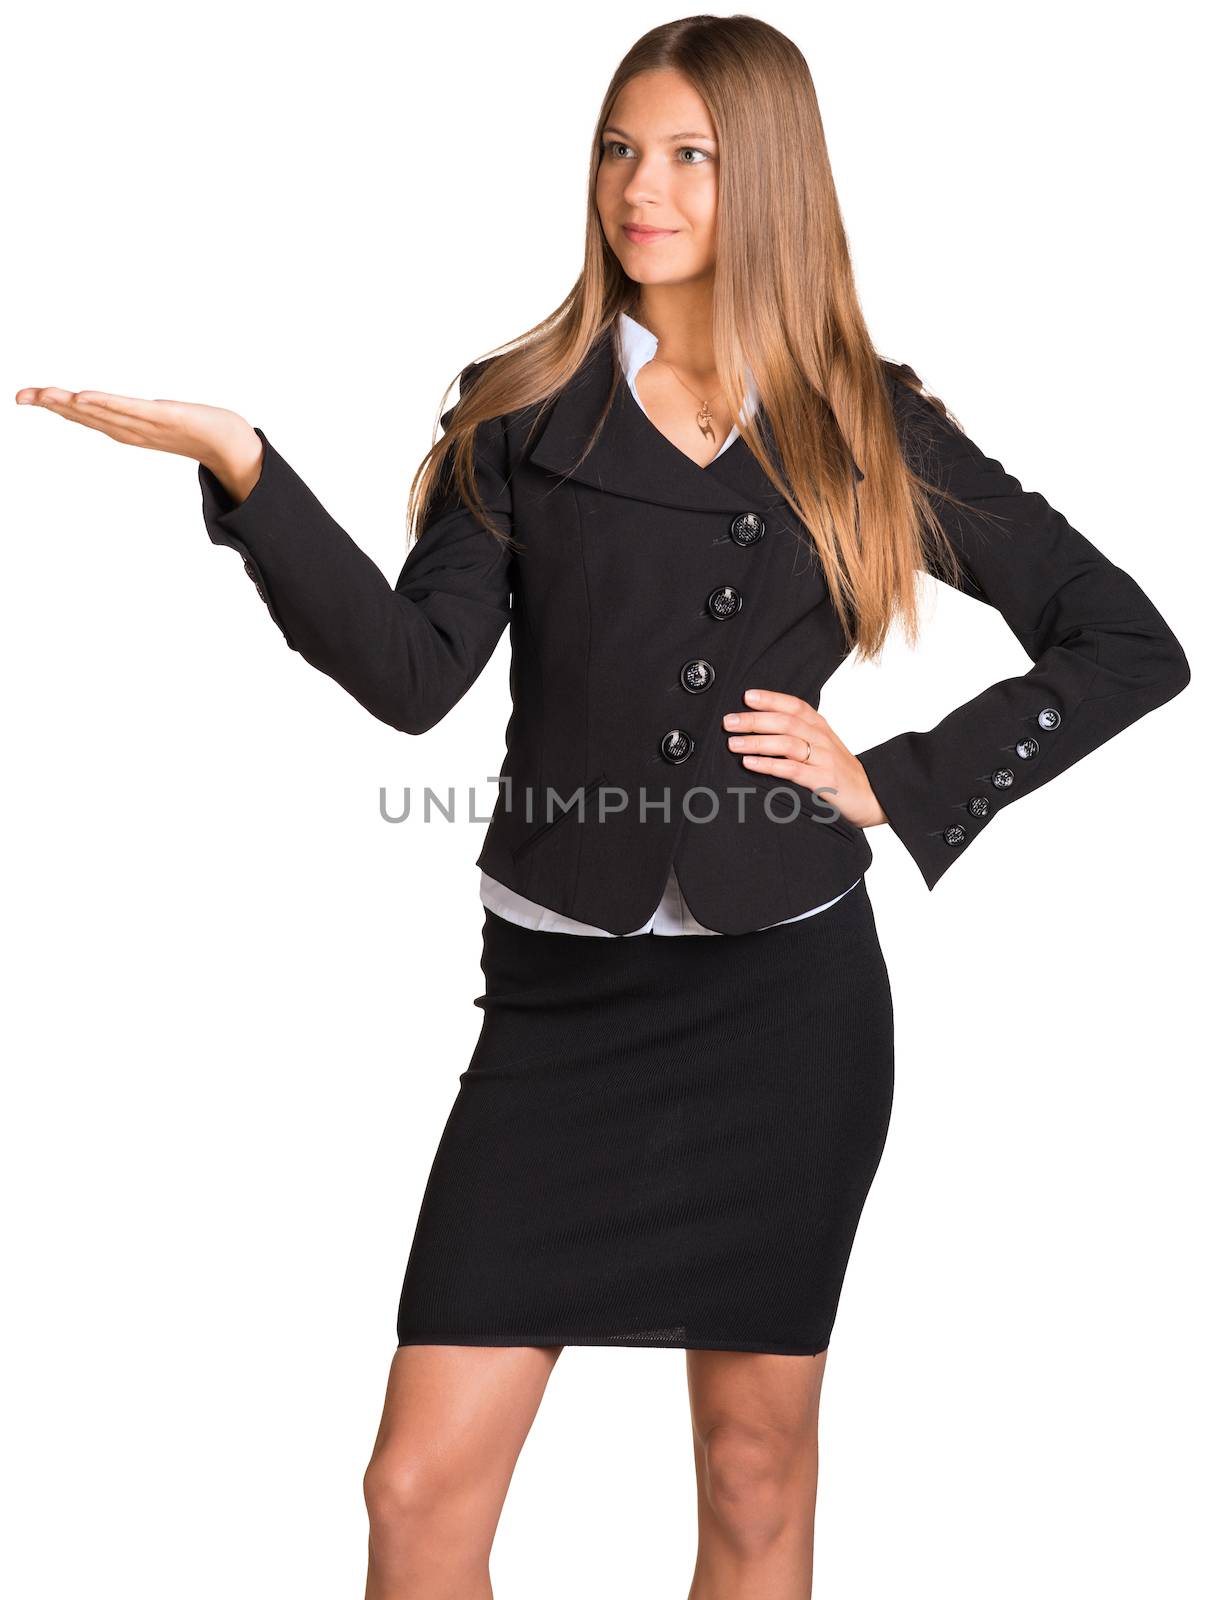 Businesswoman points hand toward. Isolated on white background